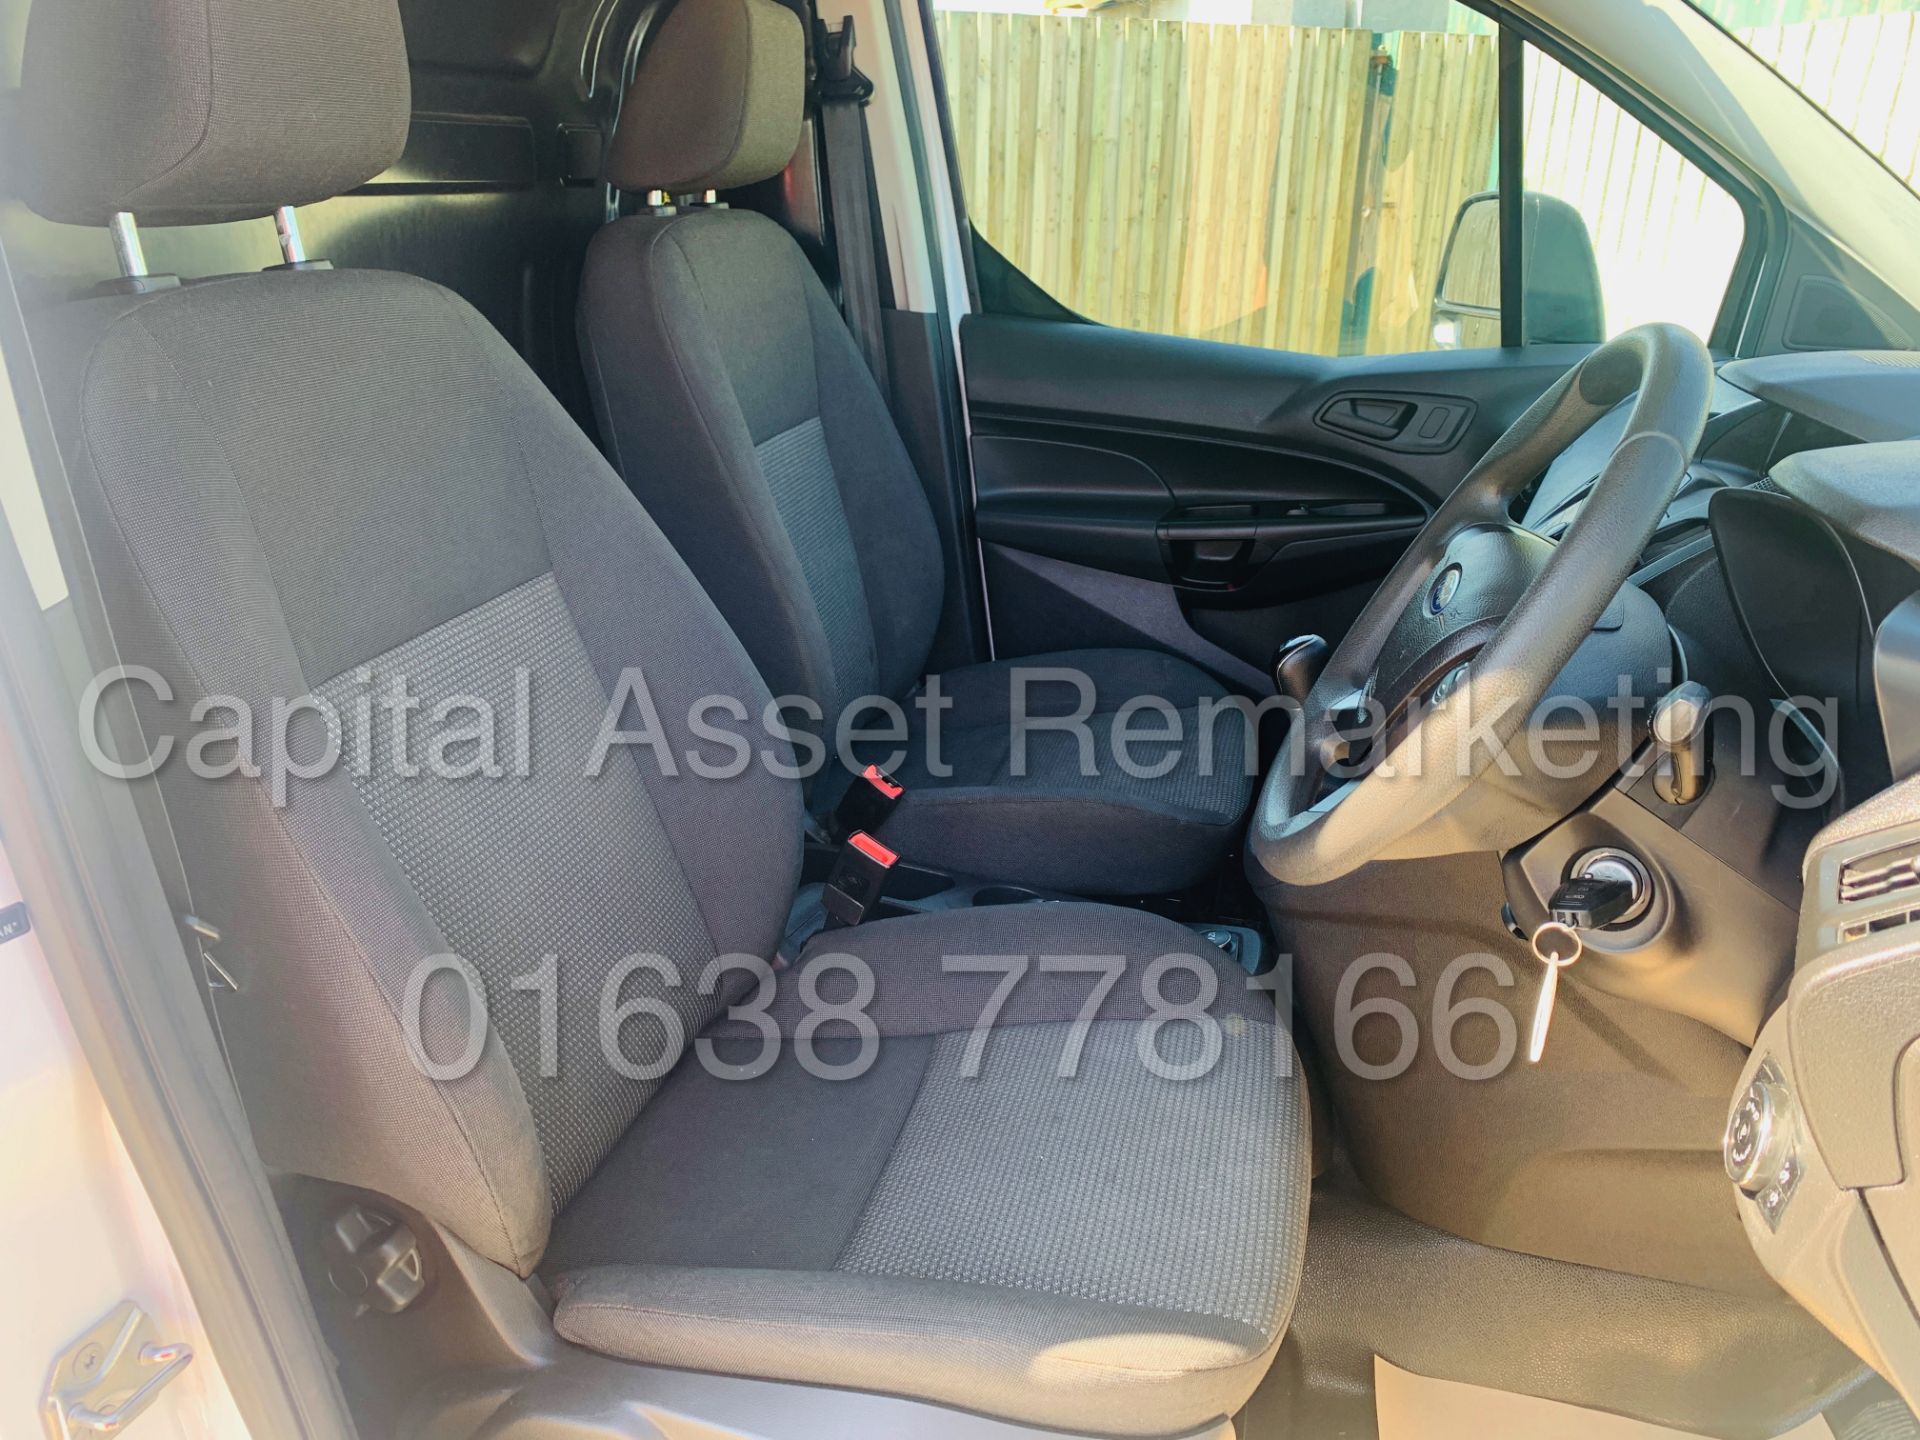 (On Sale) FORD TRANSIT CONNECT *SWB* (2017 - EURO 6) '1.5 TDCI - 6 SPEED' (1 OWNER - FULL HISTORY) - Image 27 of 38